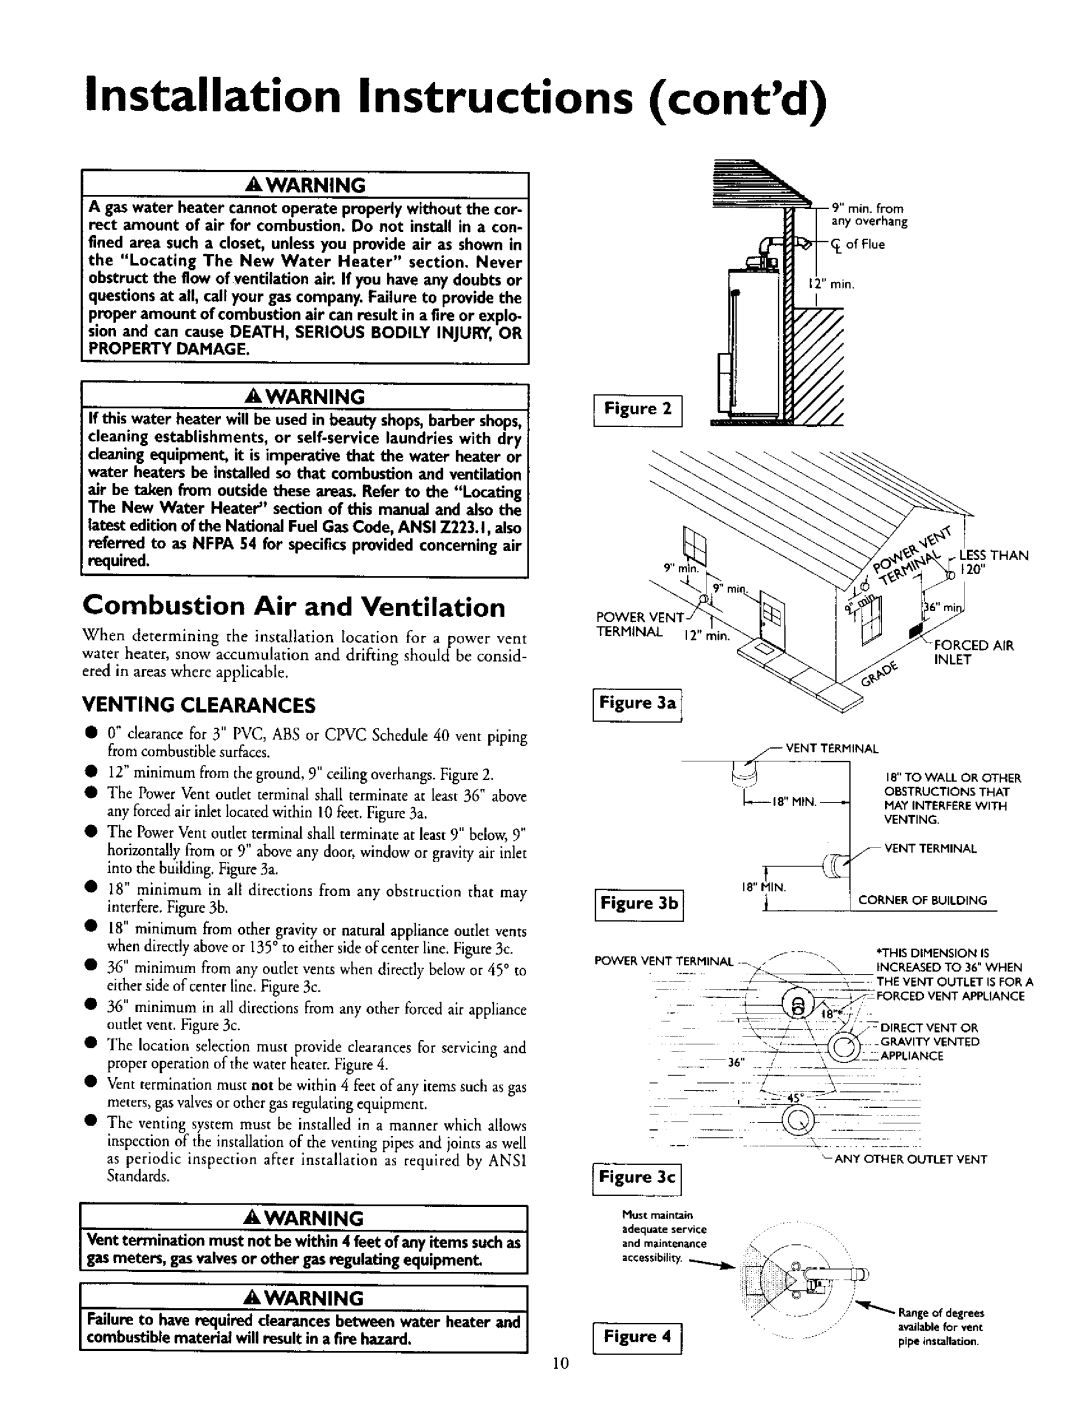 Kenmore 153.335942 Installation Instructions contd, IFigure3i, Combustion Air and Ventilation, Venting Clearances 